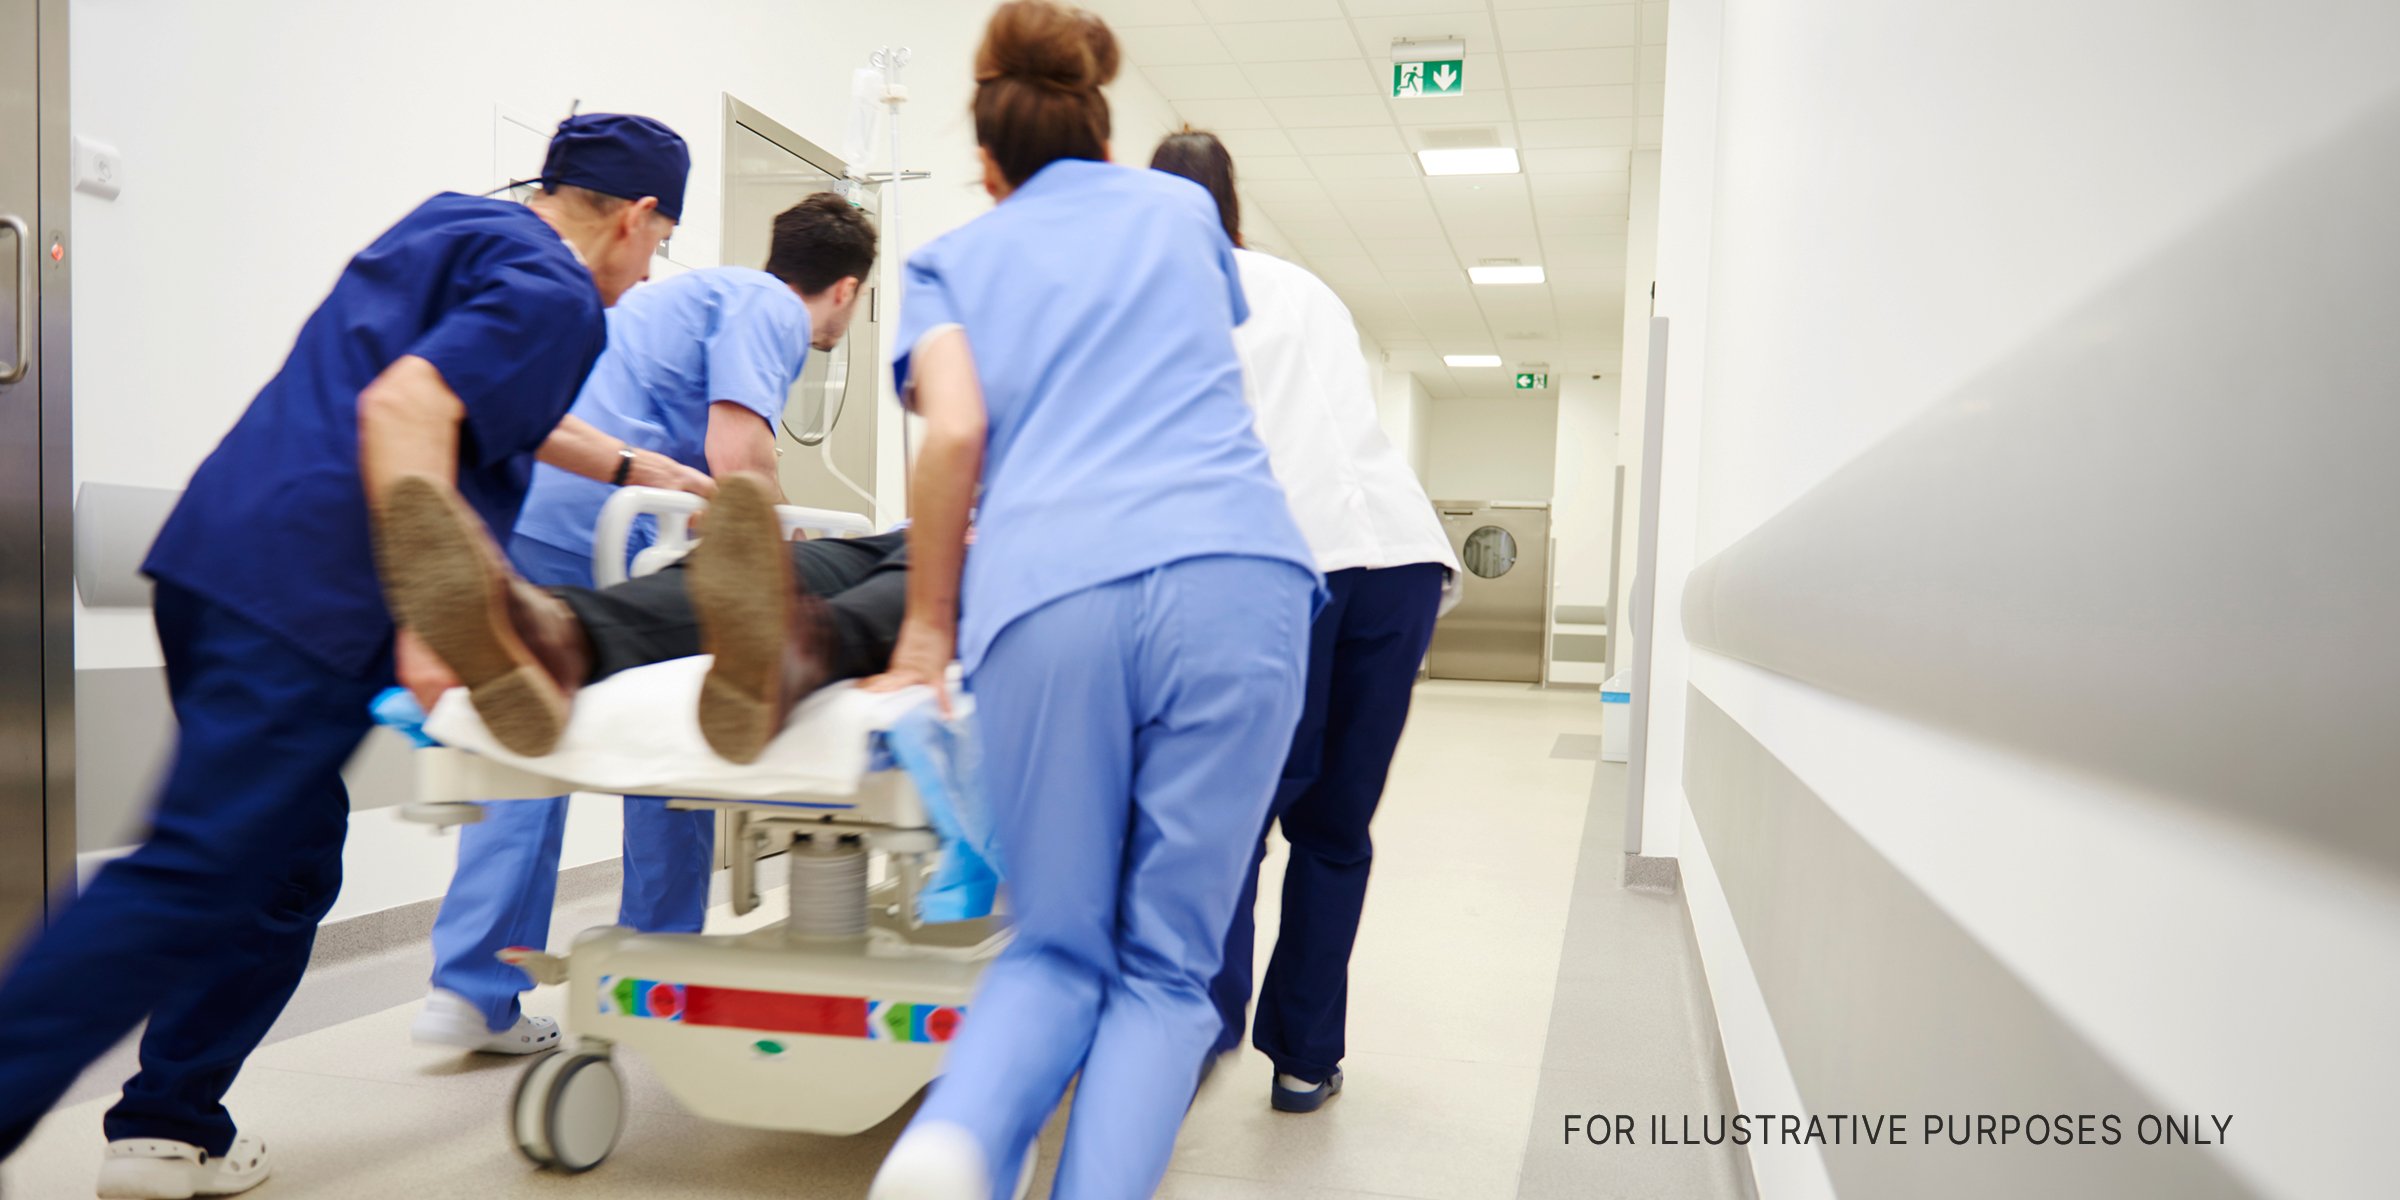 Paramedics rushing a patient on a stretcher | Source: Shutterstock